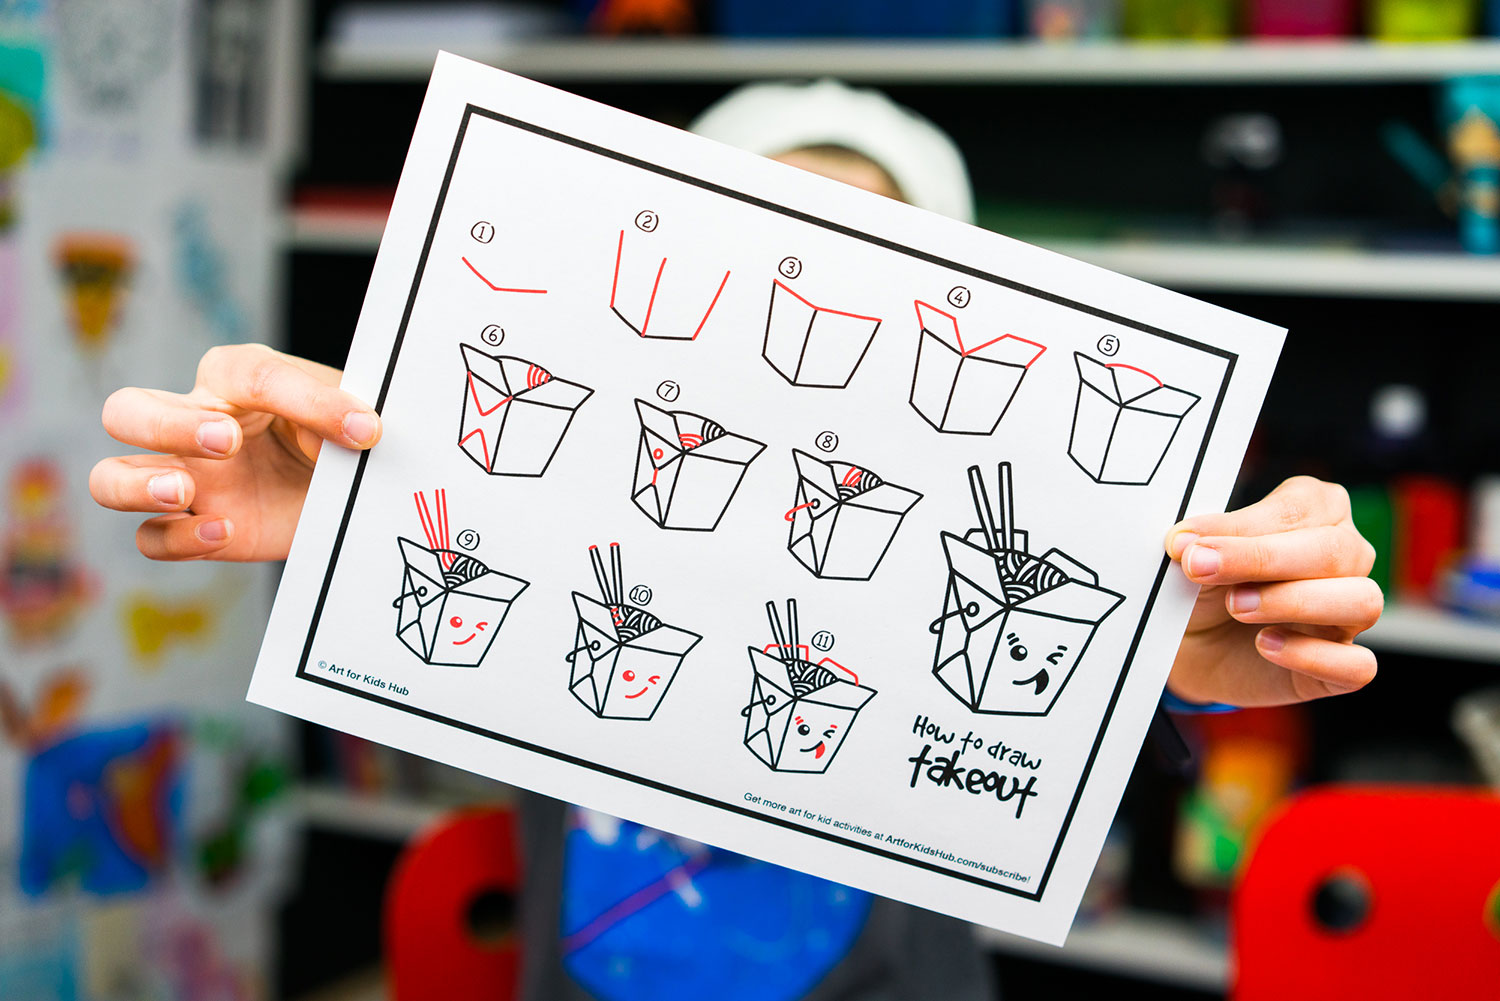 How To Draw Funny Food - Art For Kids Hub